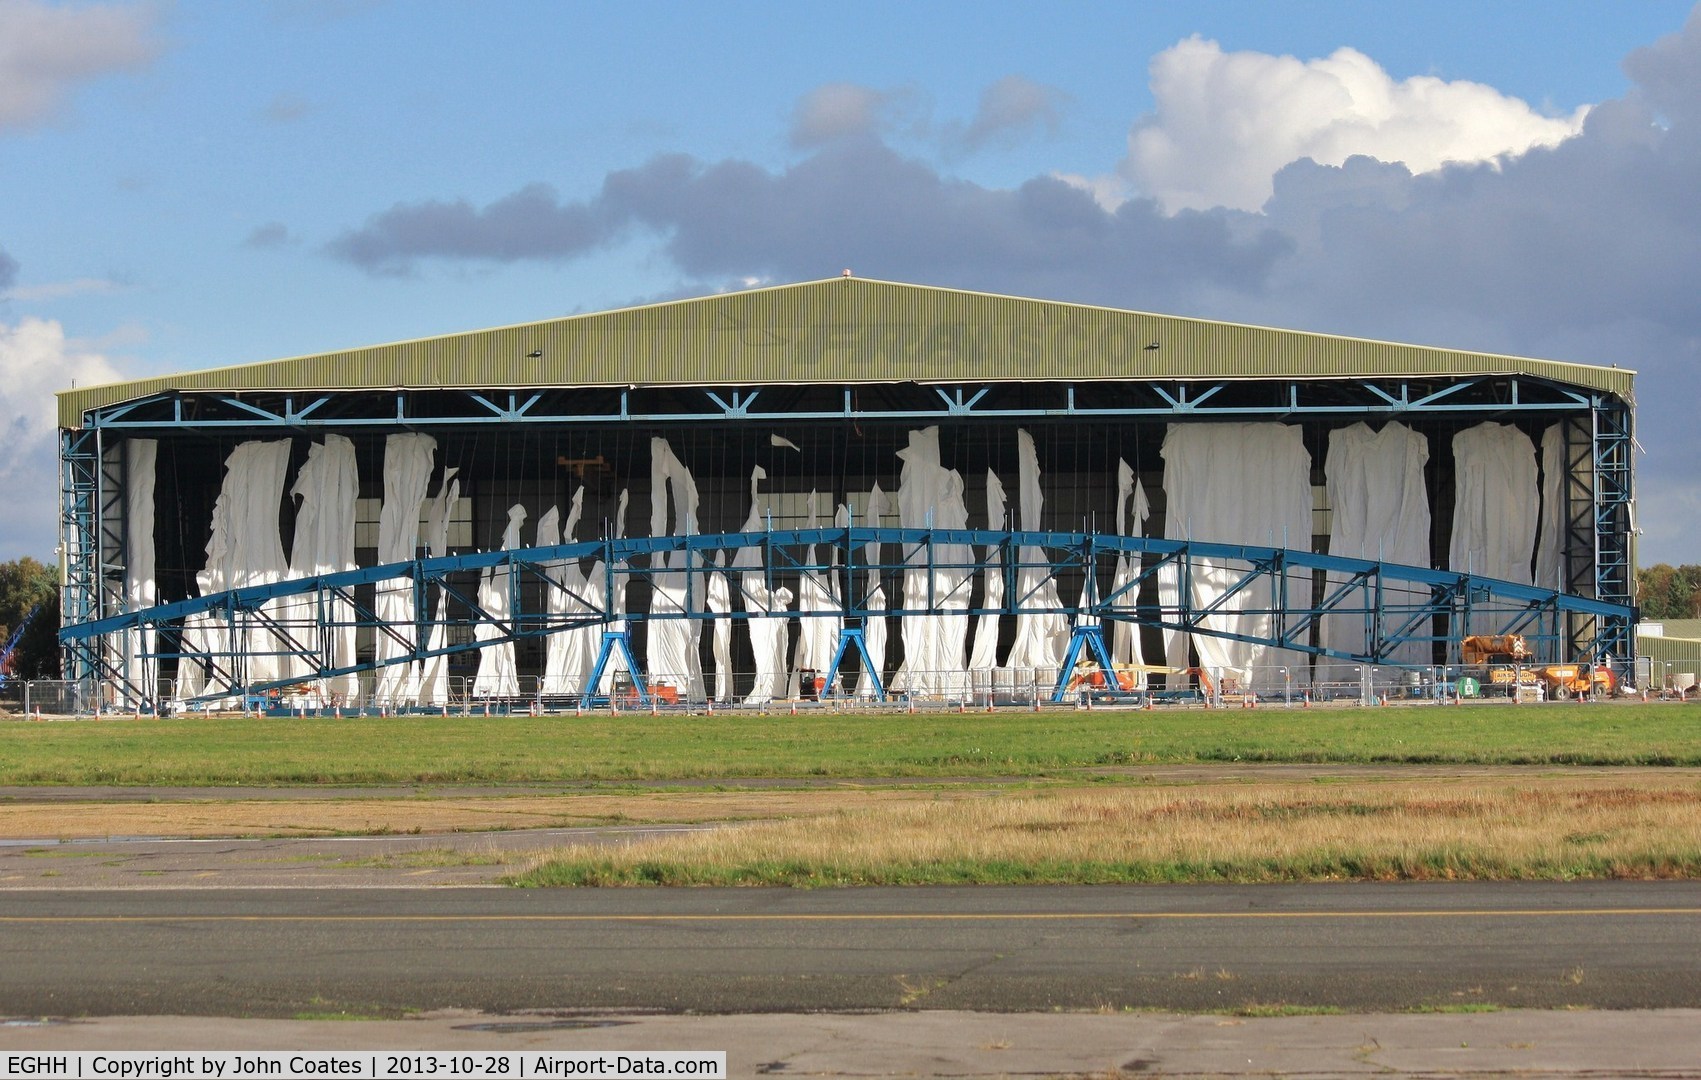 Bournemouth Airport, Bournemouth, England United Kingdom (EGHH) - Building screen for hangar extension shredded in violent storm